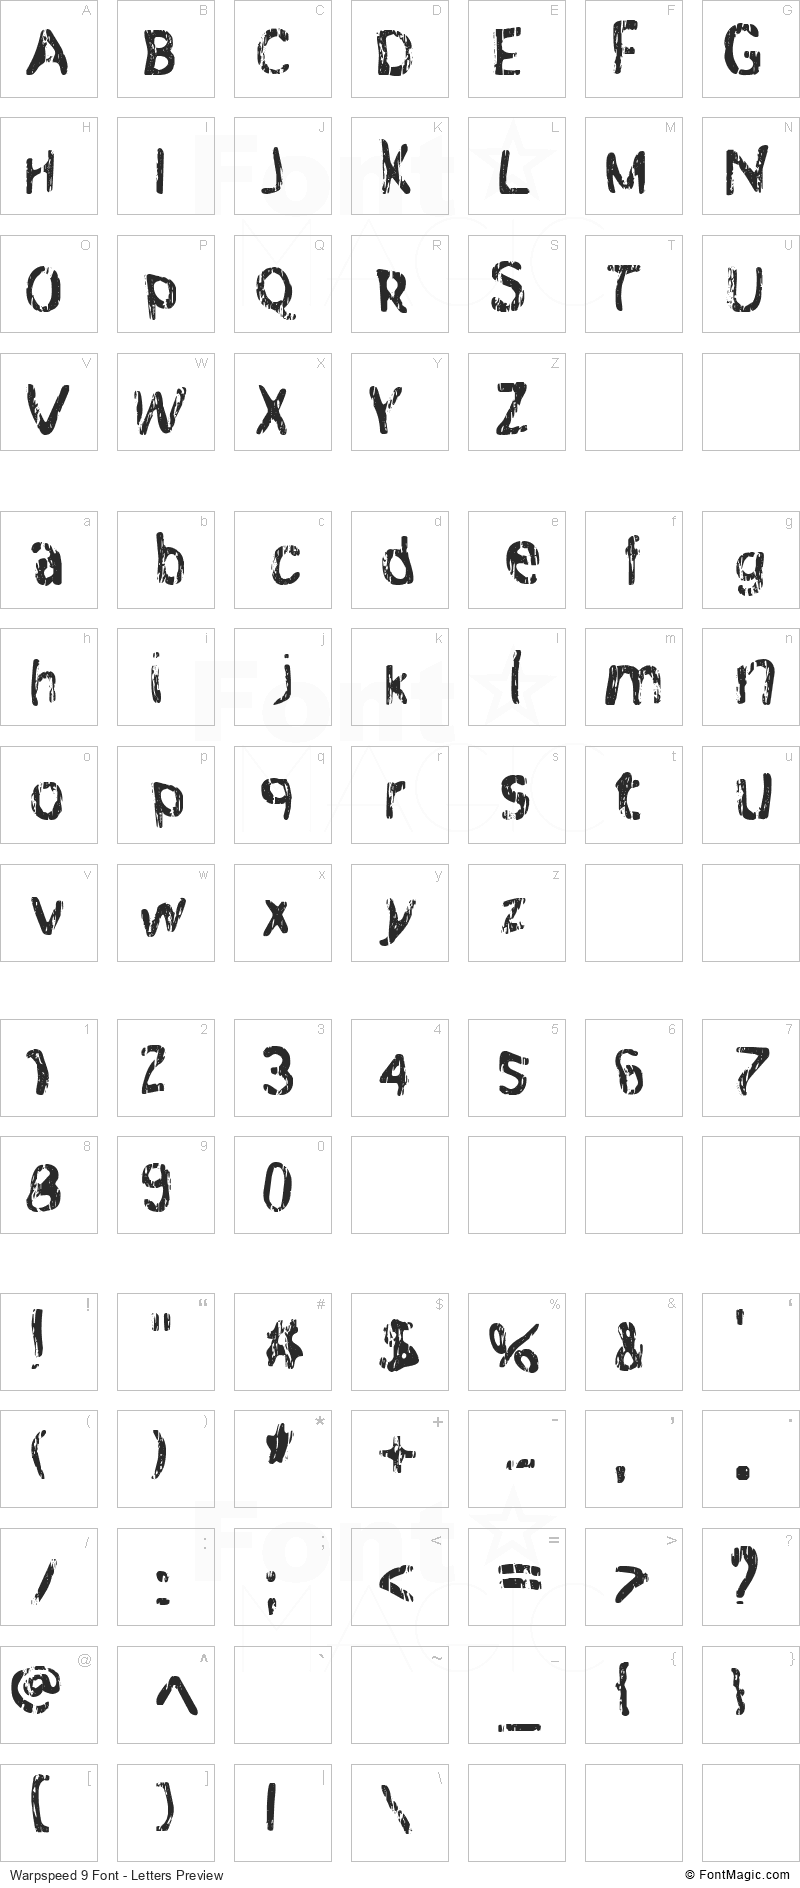 Warpspeed 9 Font - All Latters Preview Chart